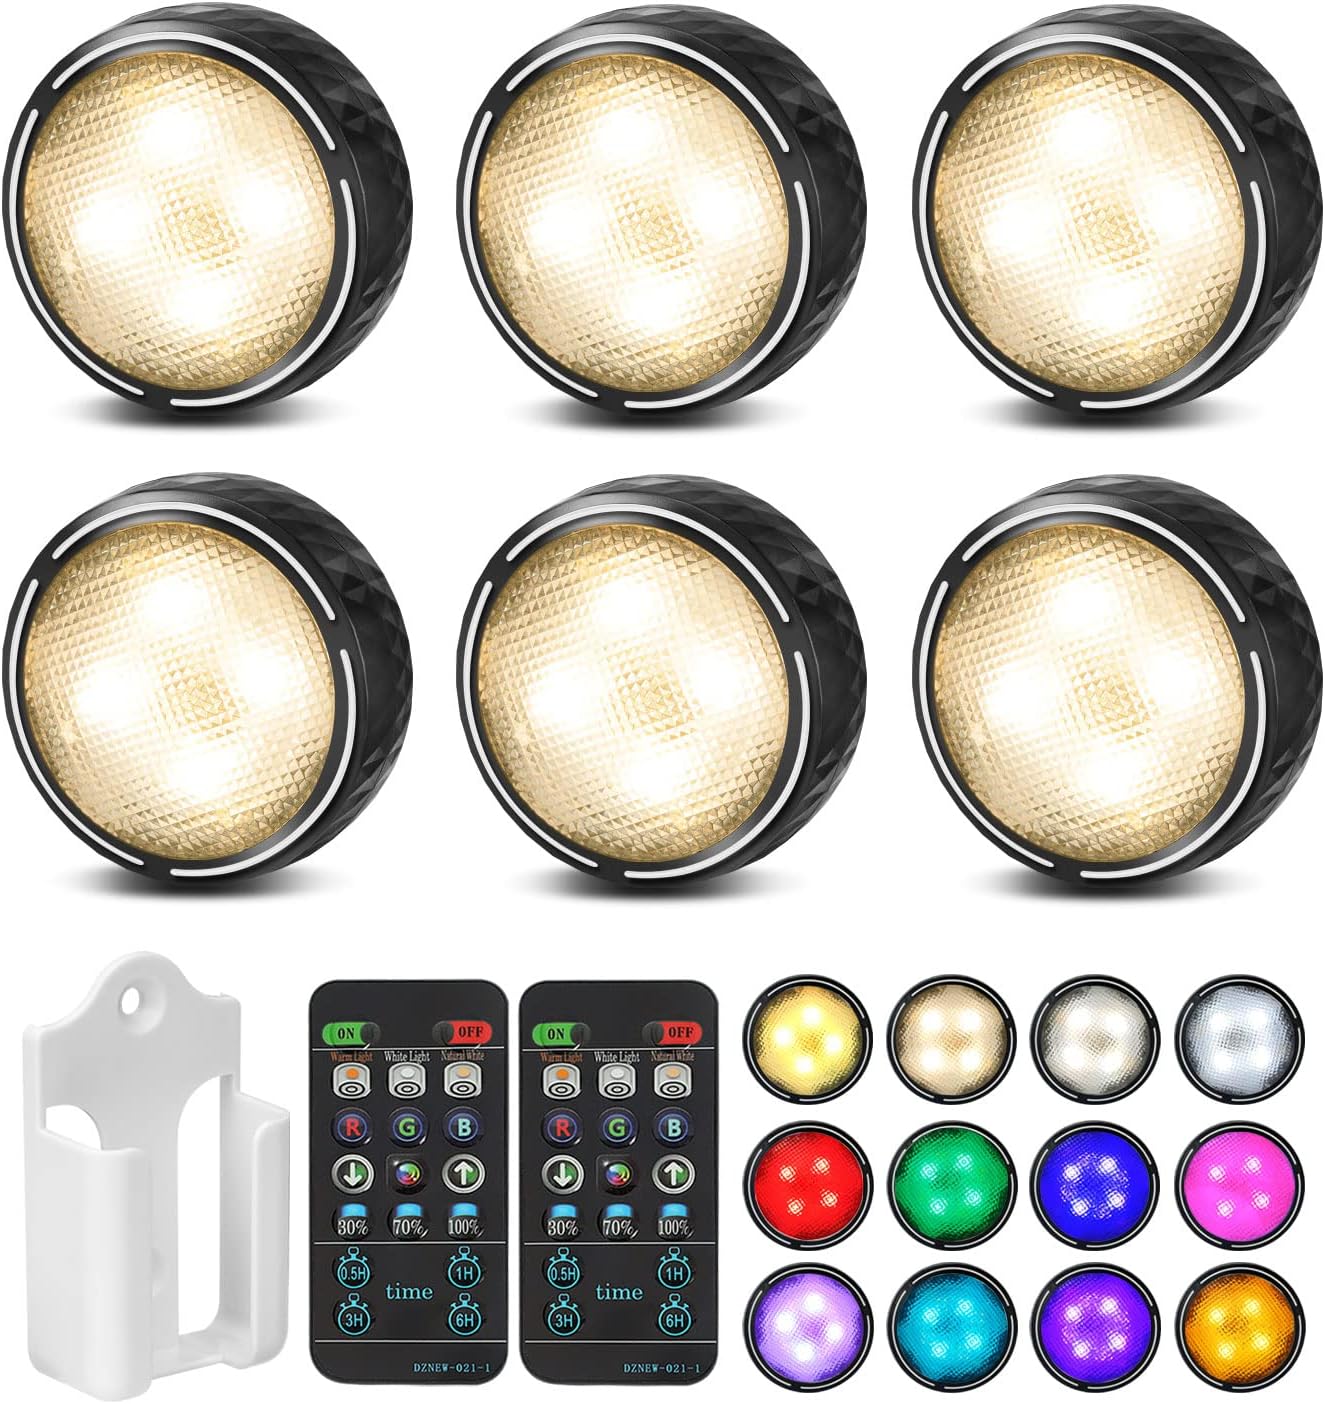 LED Puck Lights with Remote Control, Battery Operated [...]